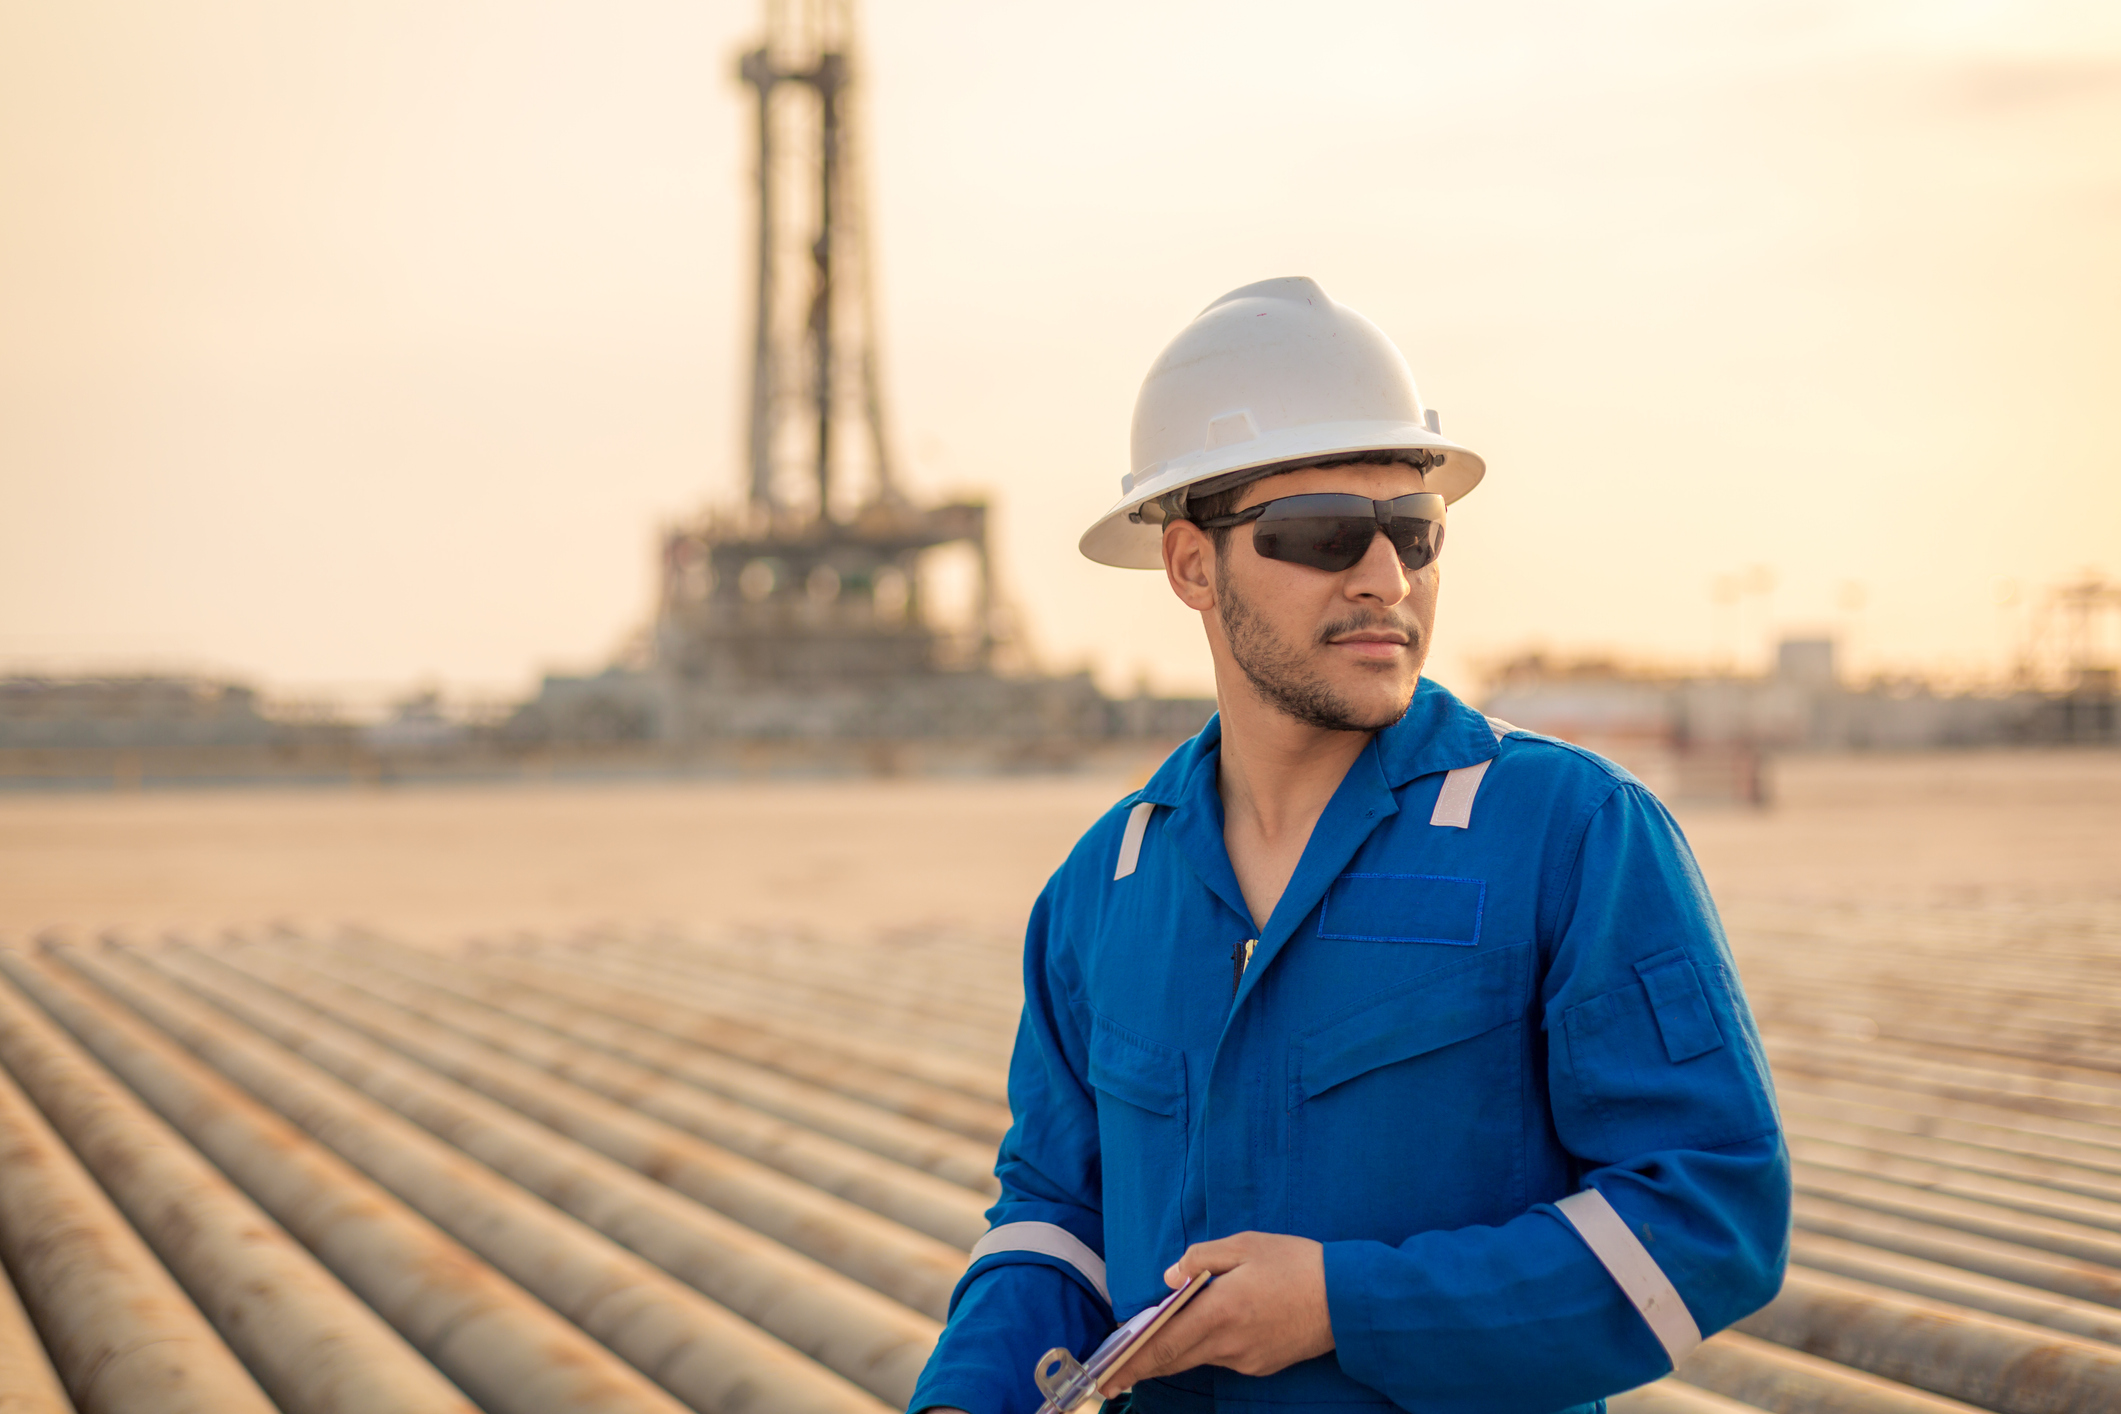 Health and safety engineer at a middle east oil field